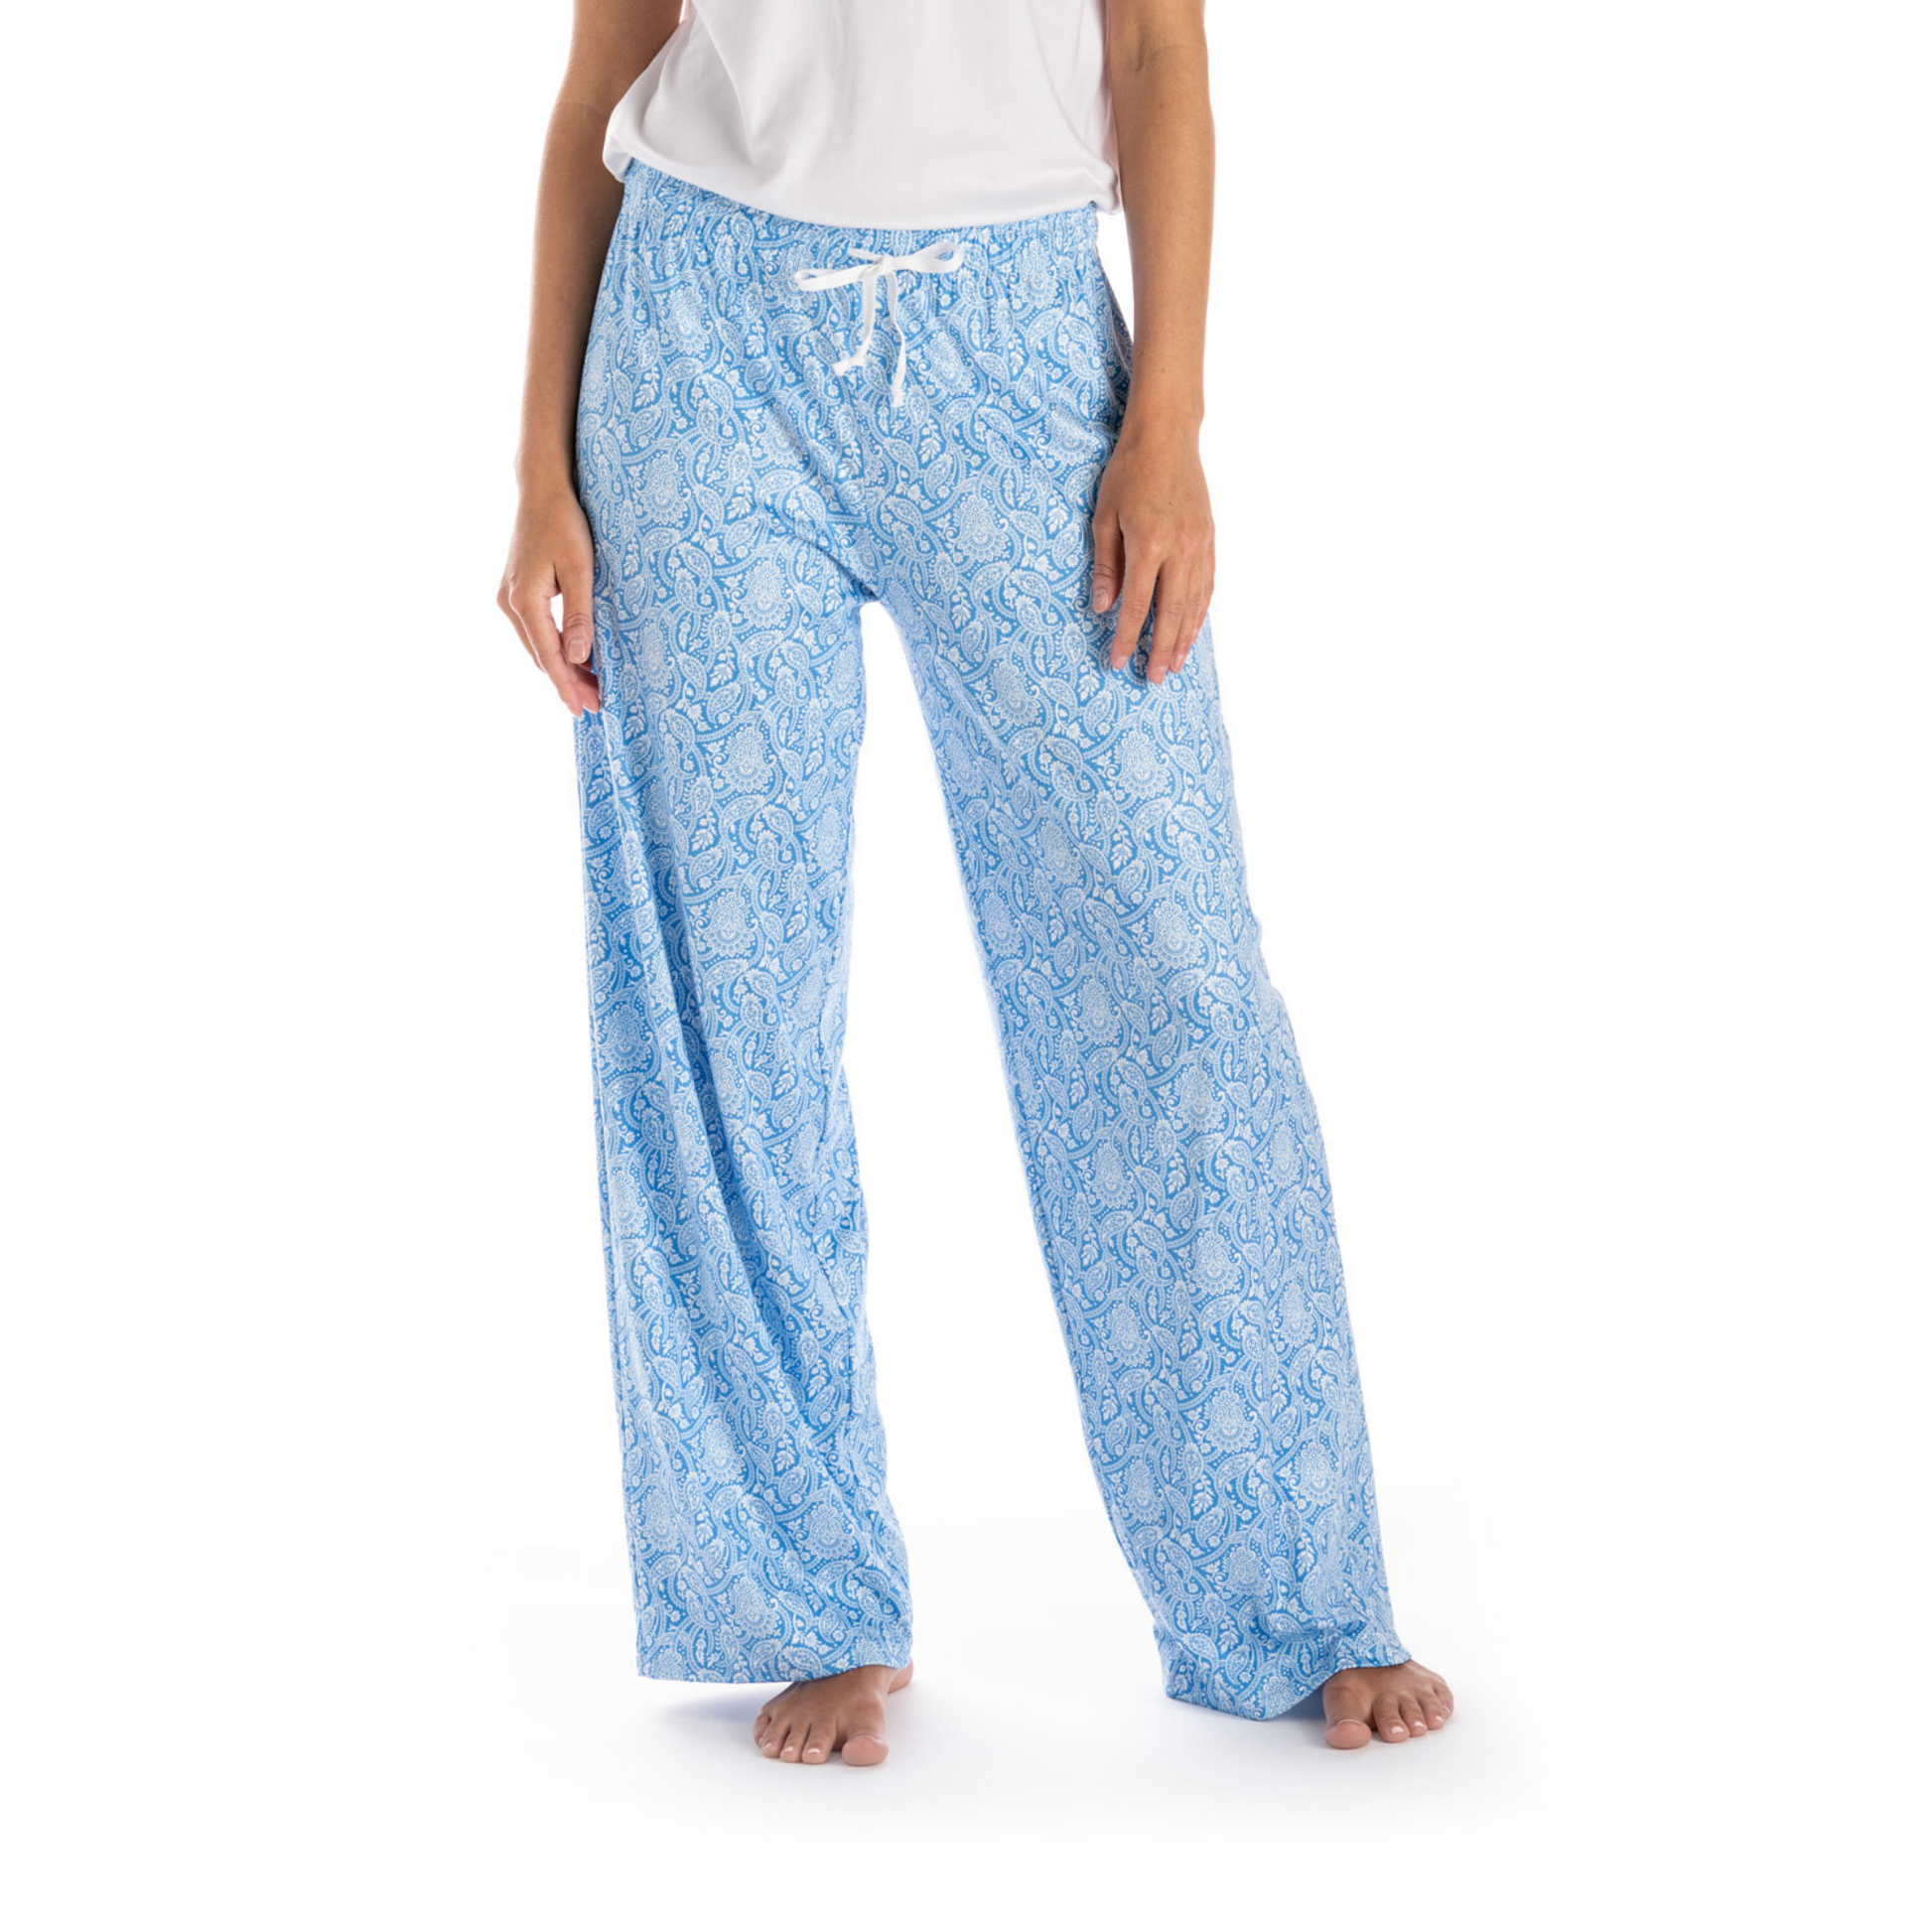 Super soft blue and white paisley print loungewear pants with drawstring